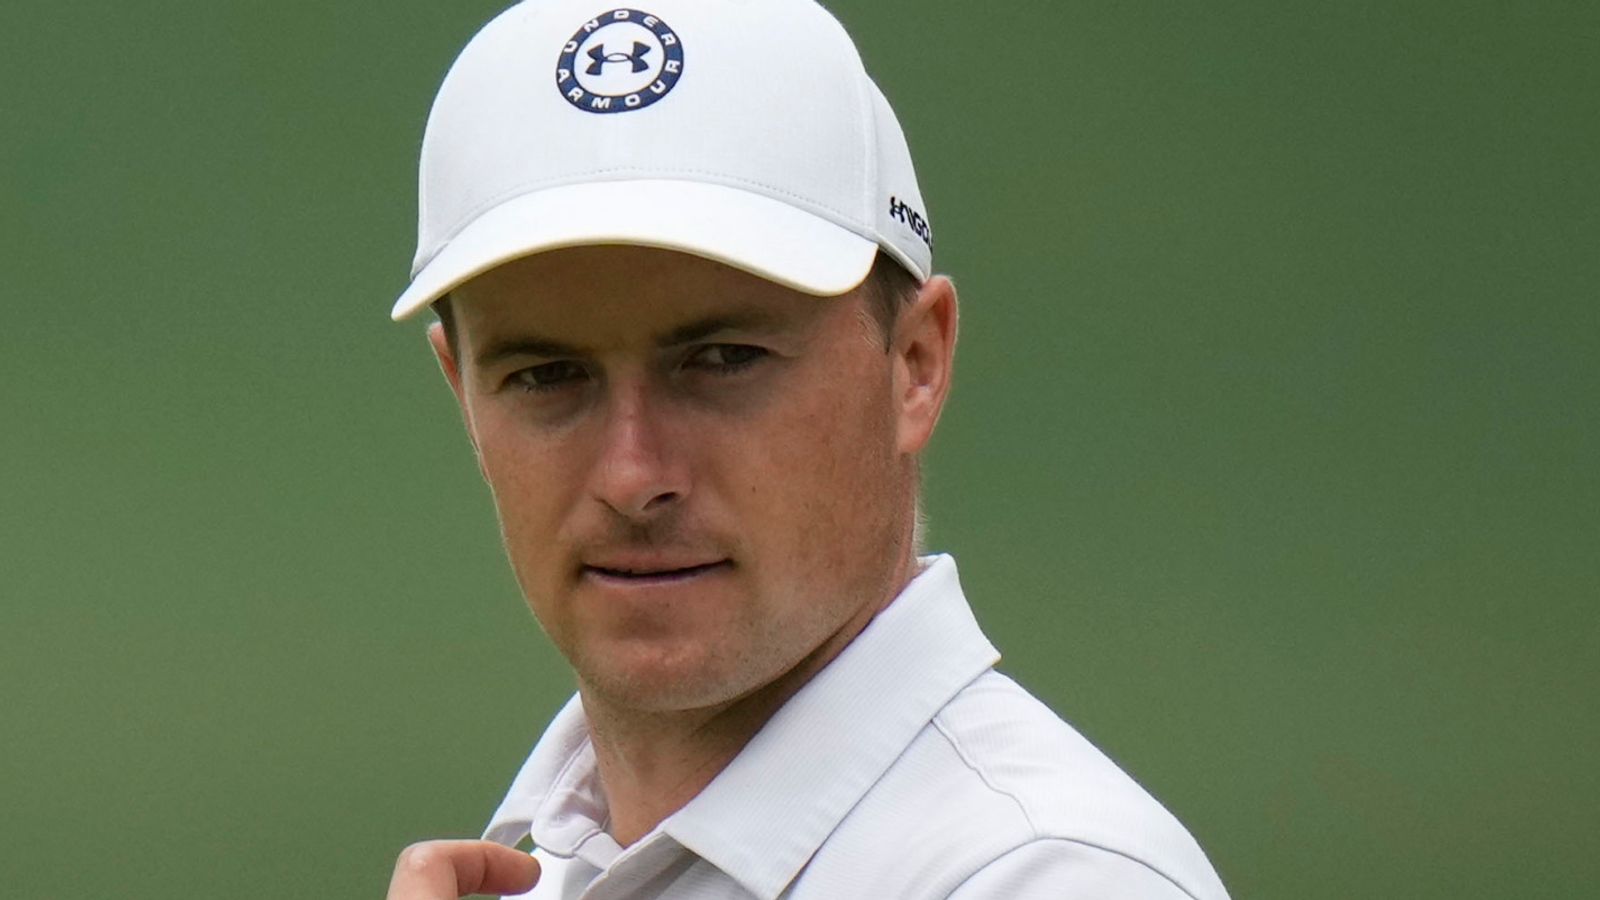 Jordan Spieth: Golfer confirms he is an investor in Leeds United with Justin Thomas as part of 49ers takeover | Football News